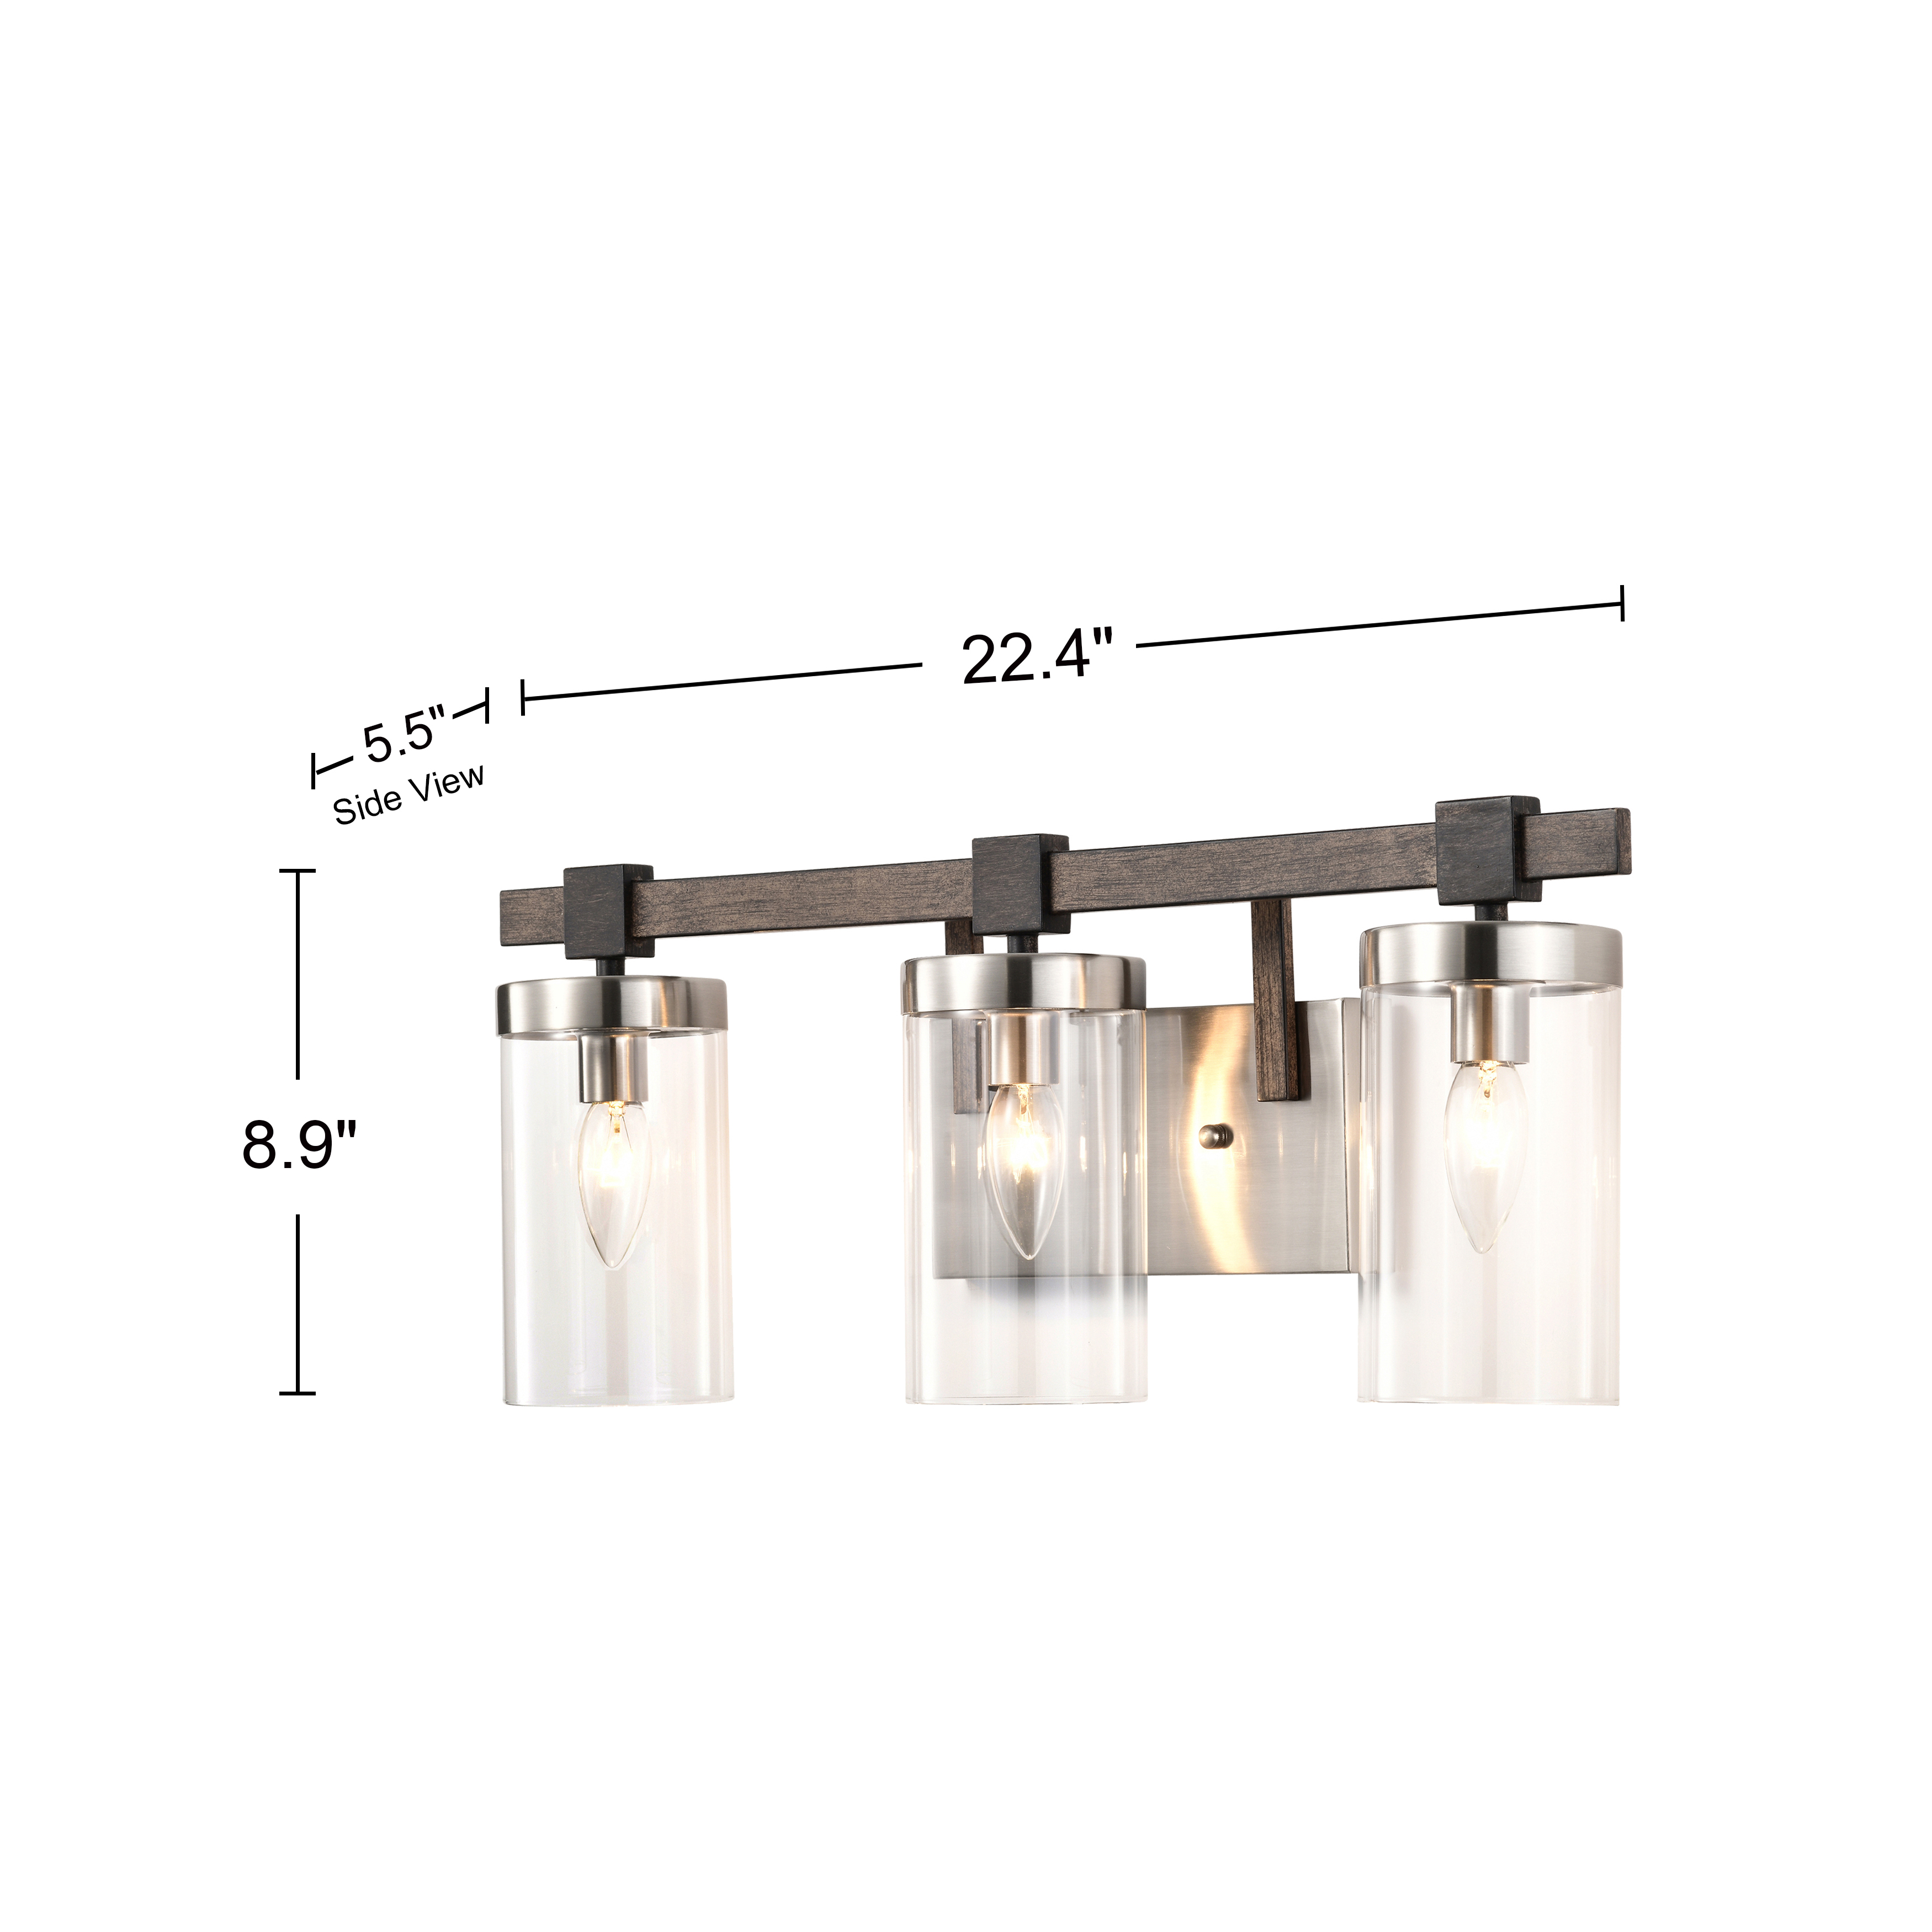 Bella 3-Light Satin Nickel and Faux Wood Finish Glass Wall Sconce